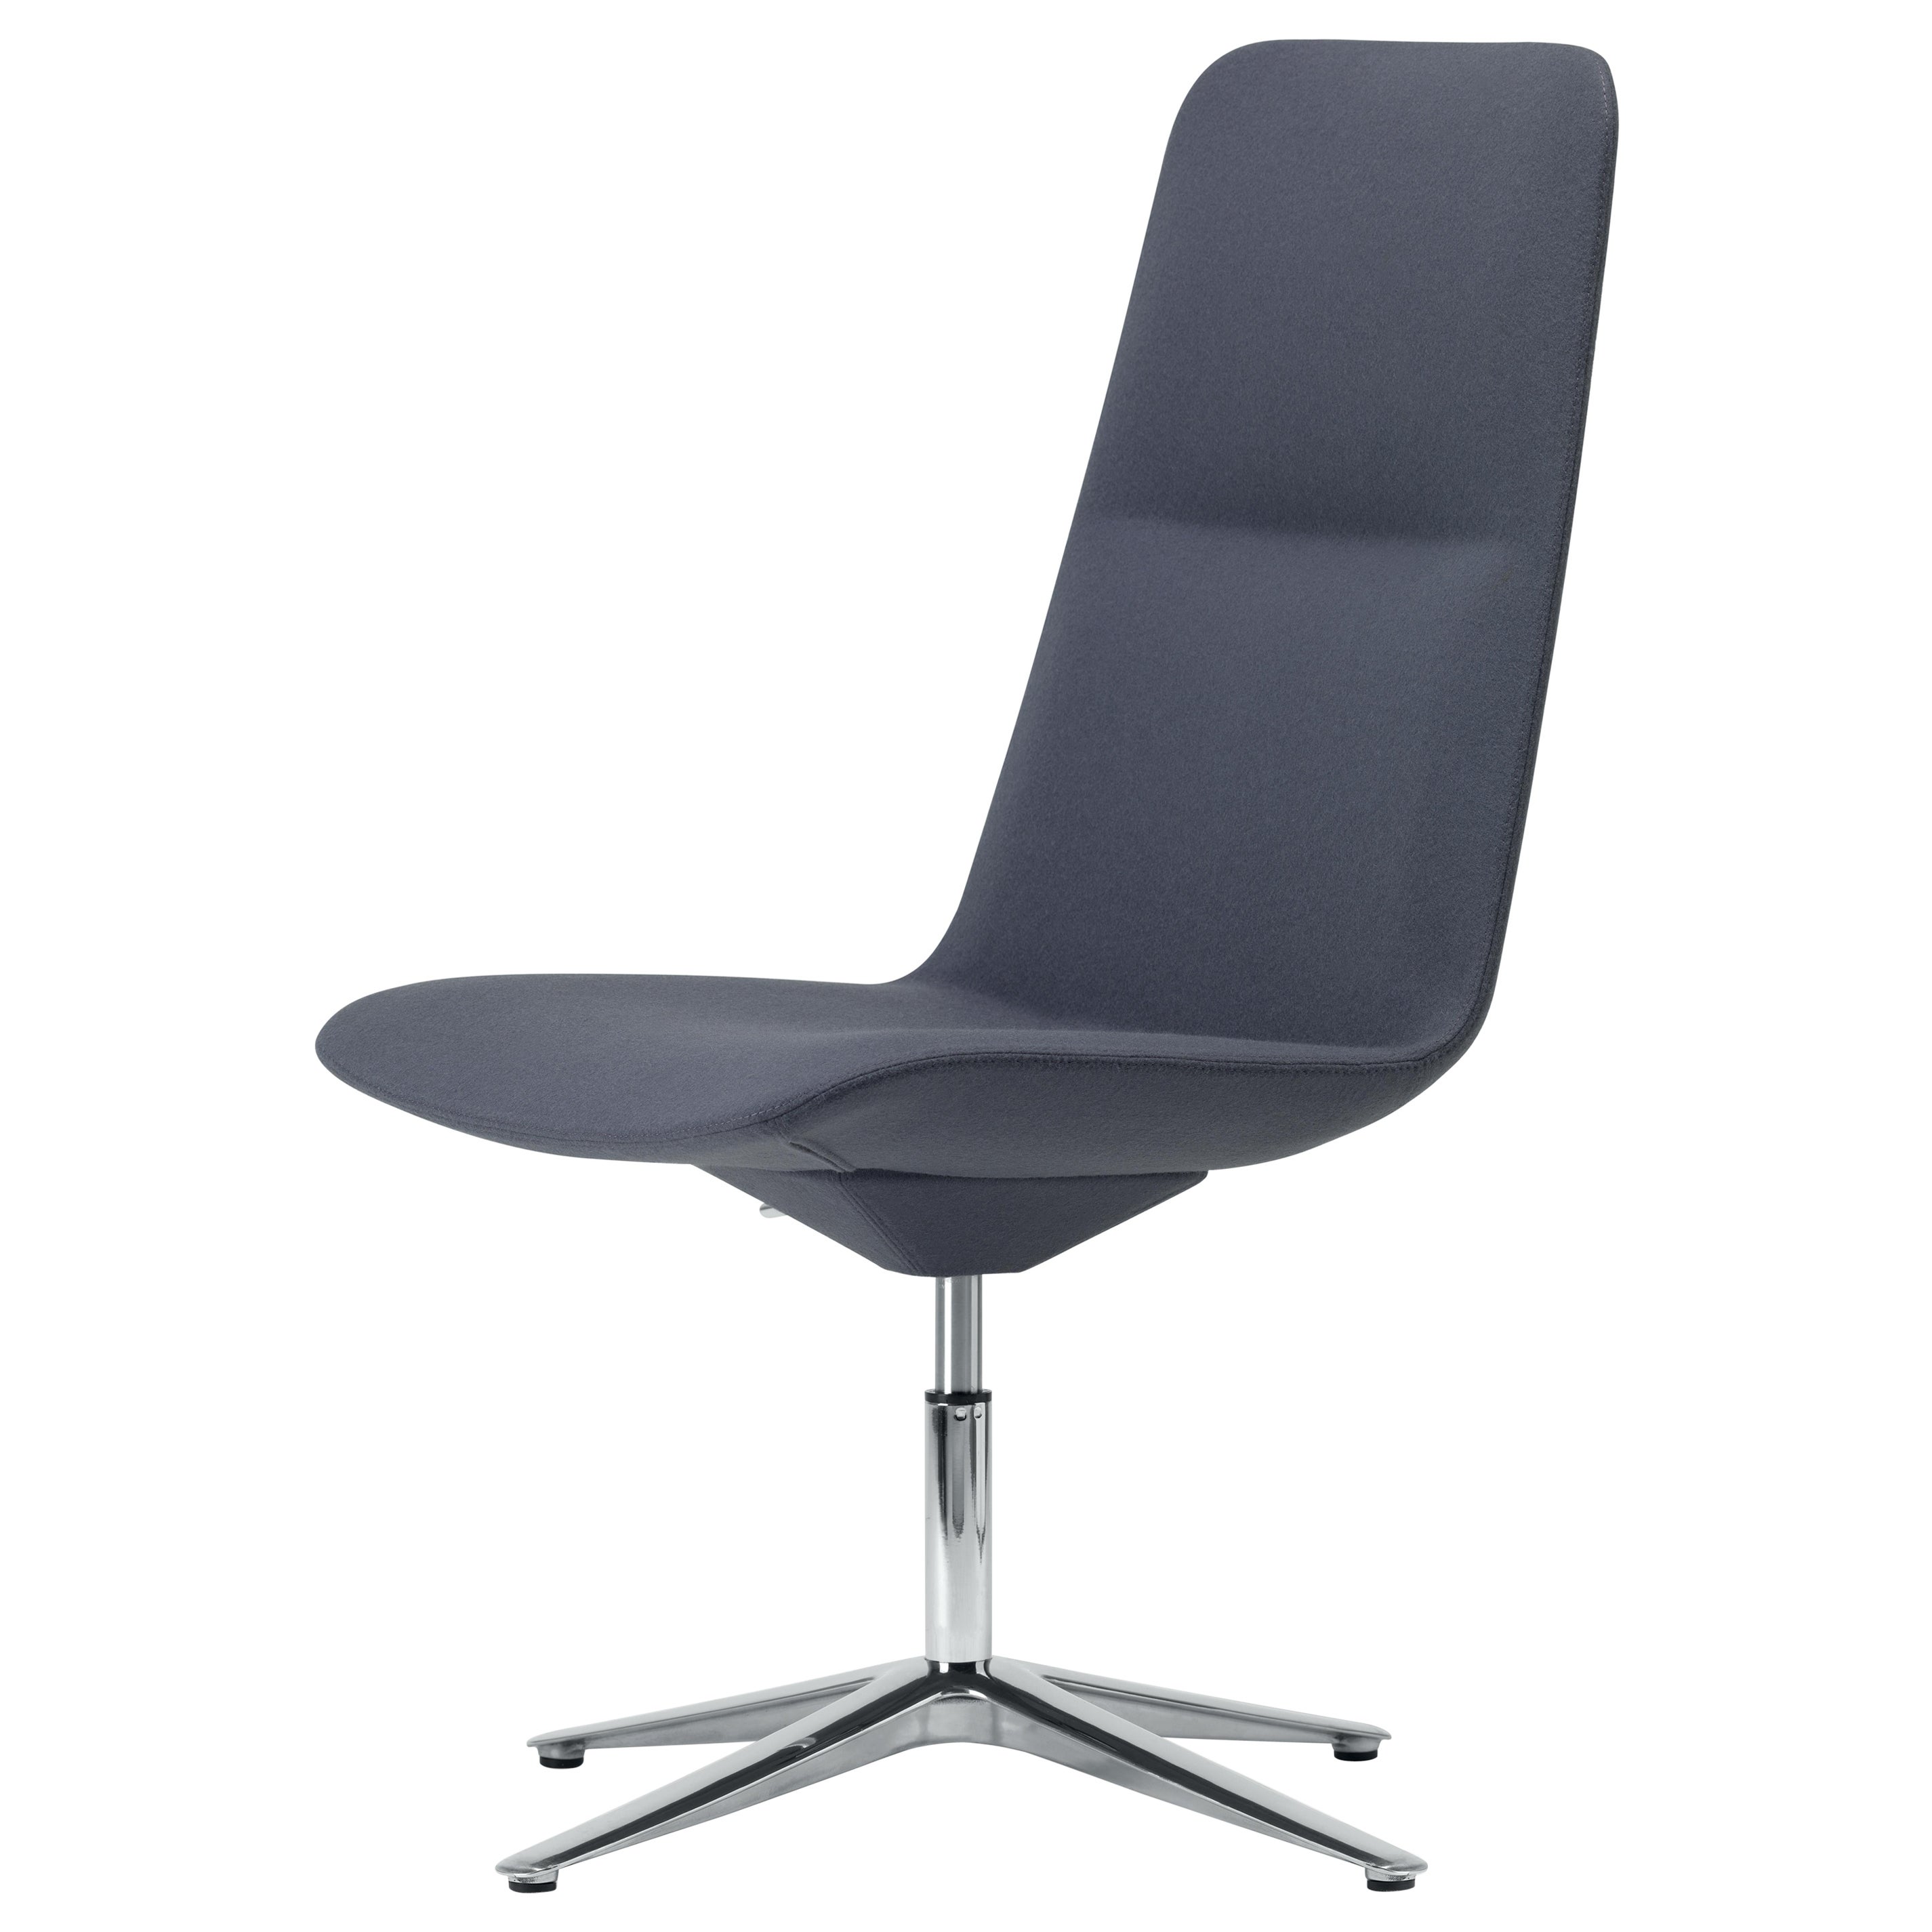 Alias 807 Slim Conference Medium 4 Chair in Grey Seat & Polished Aluminum Frame